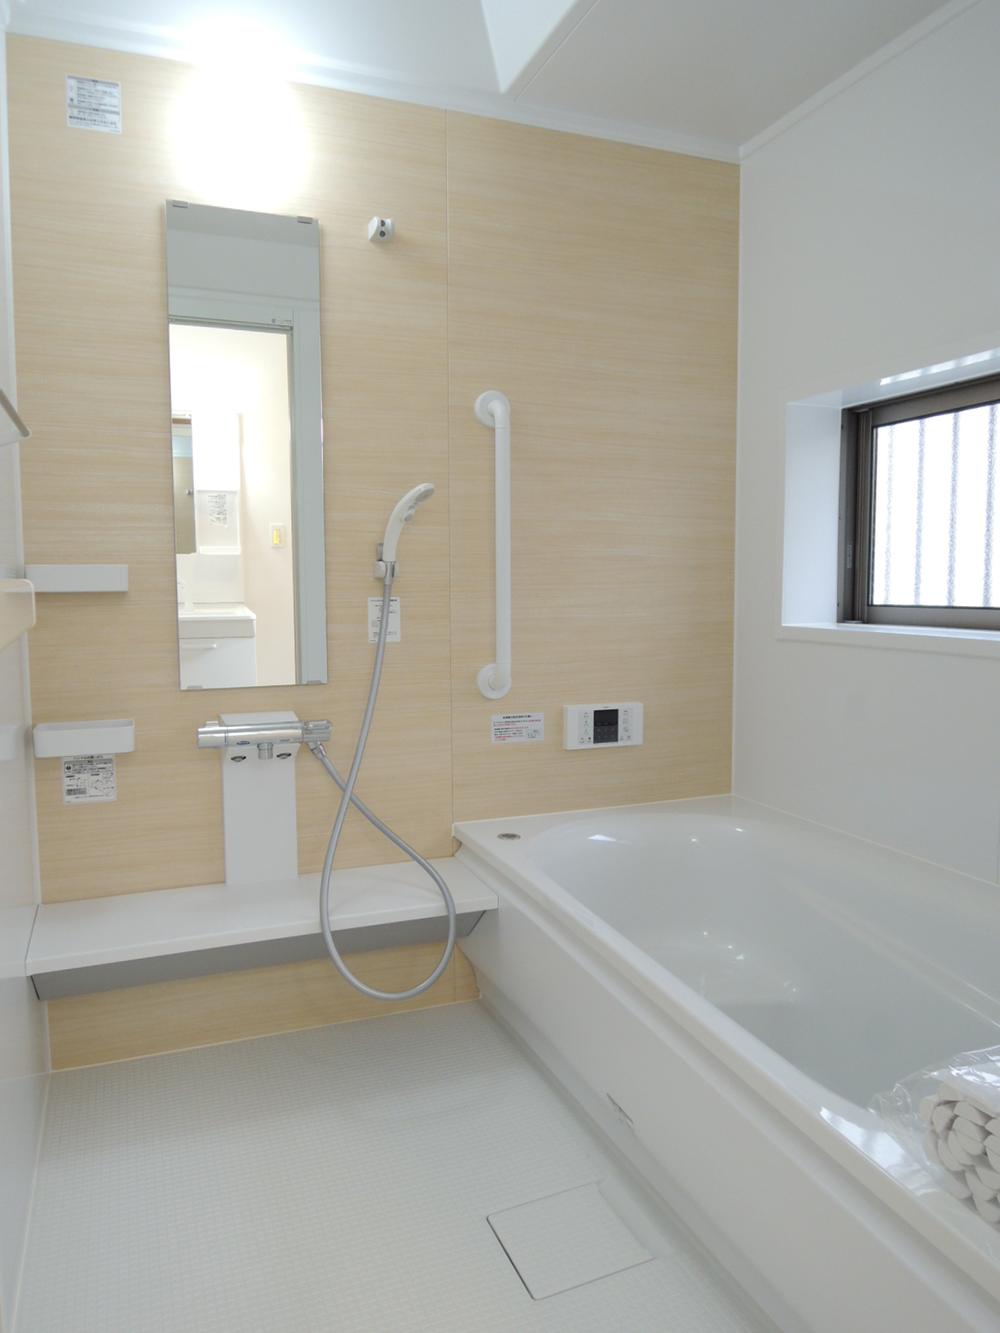 Same specifications photo (bathroom). Unit bus (same specifications)